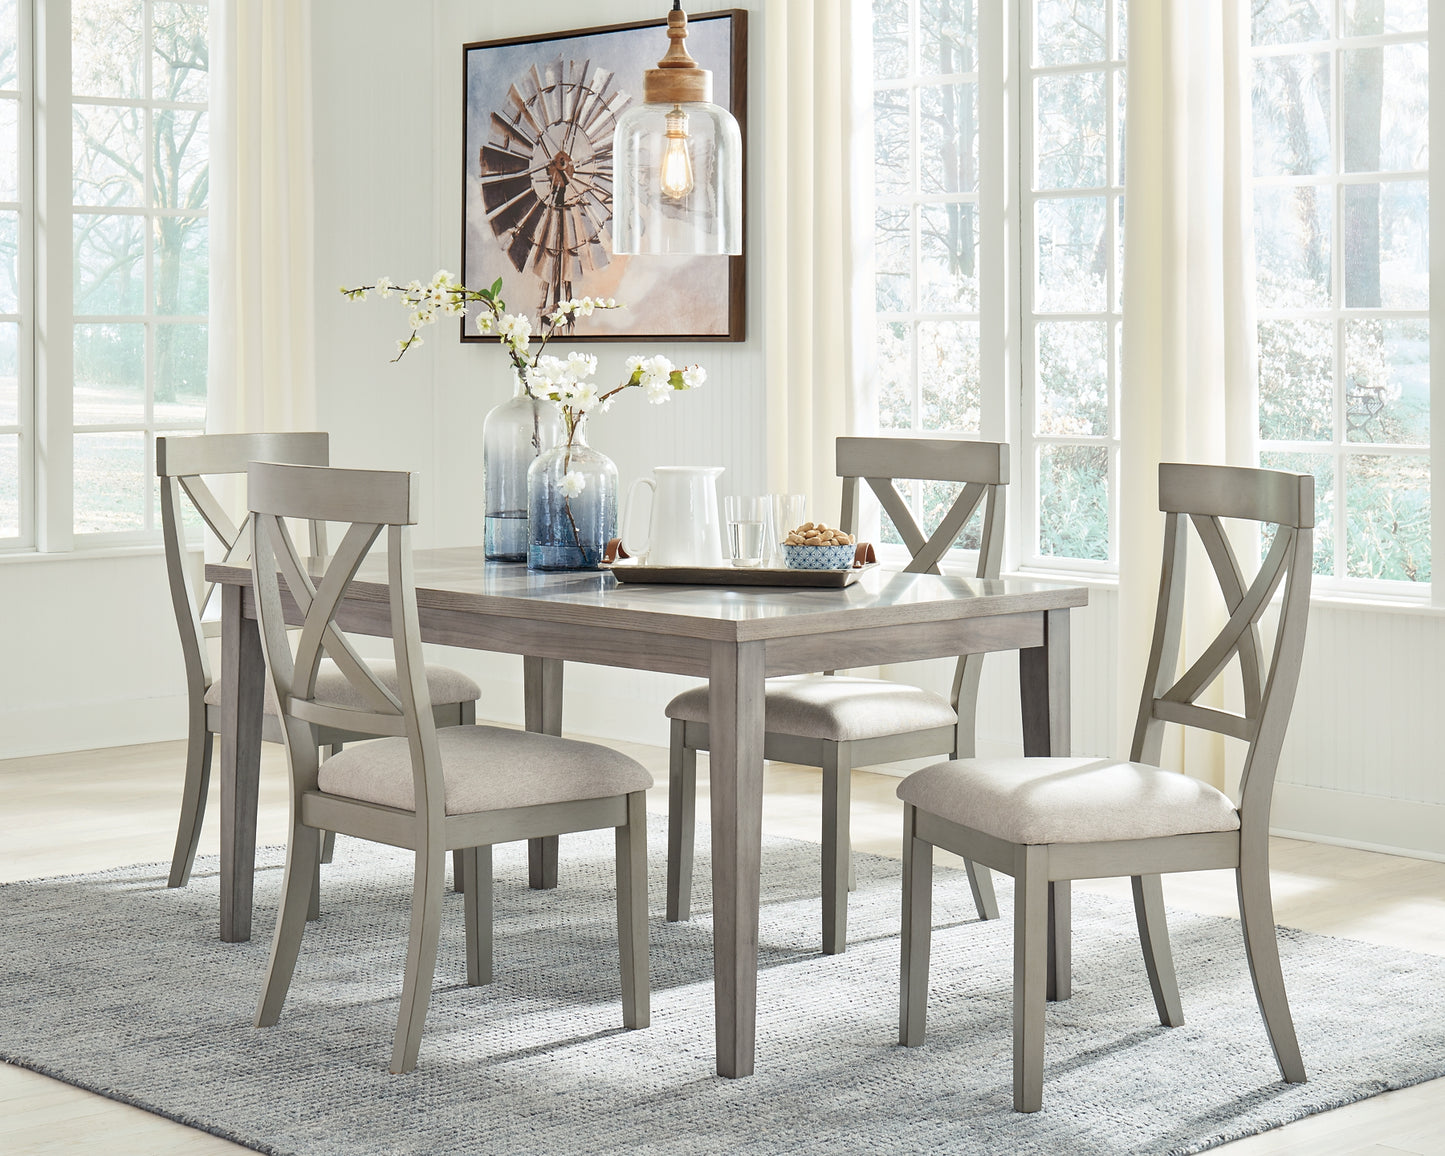 Parellen Dining Table and 4 Chairs Wilson Furniture (OH)  in Bridgeport, Ohio. Serving Bridgeport, Yorkville, Bellaire, & Avondale